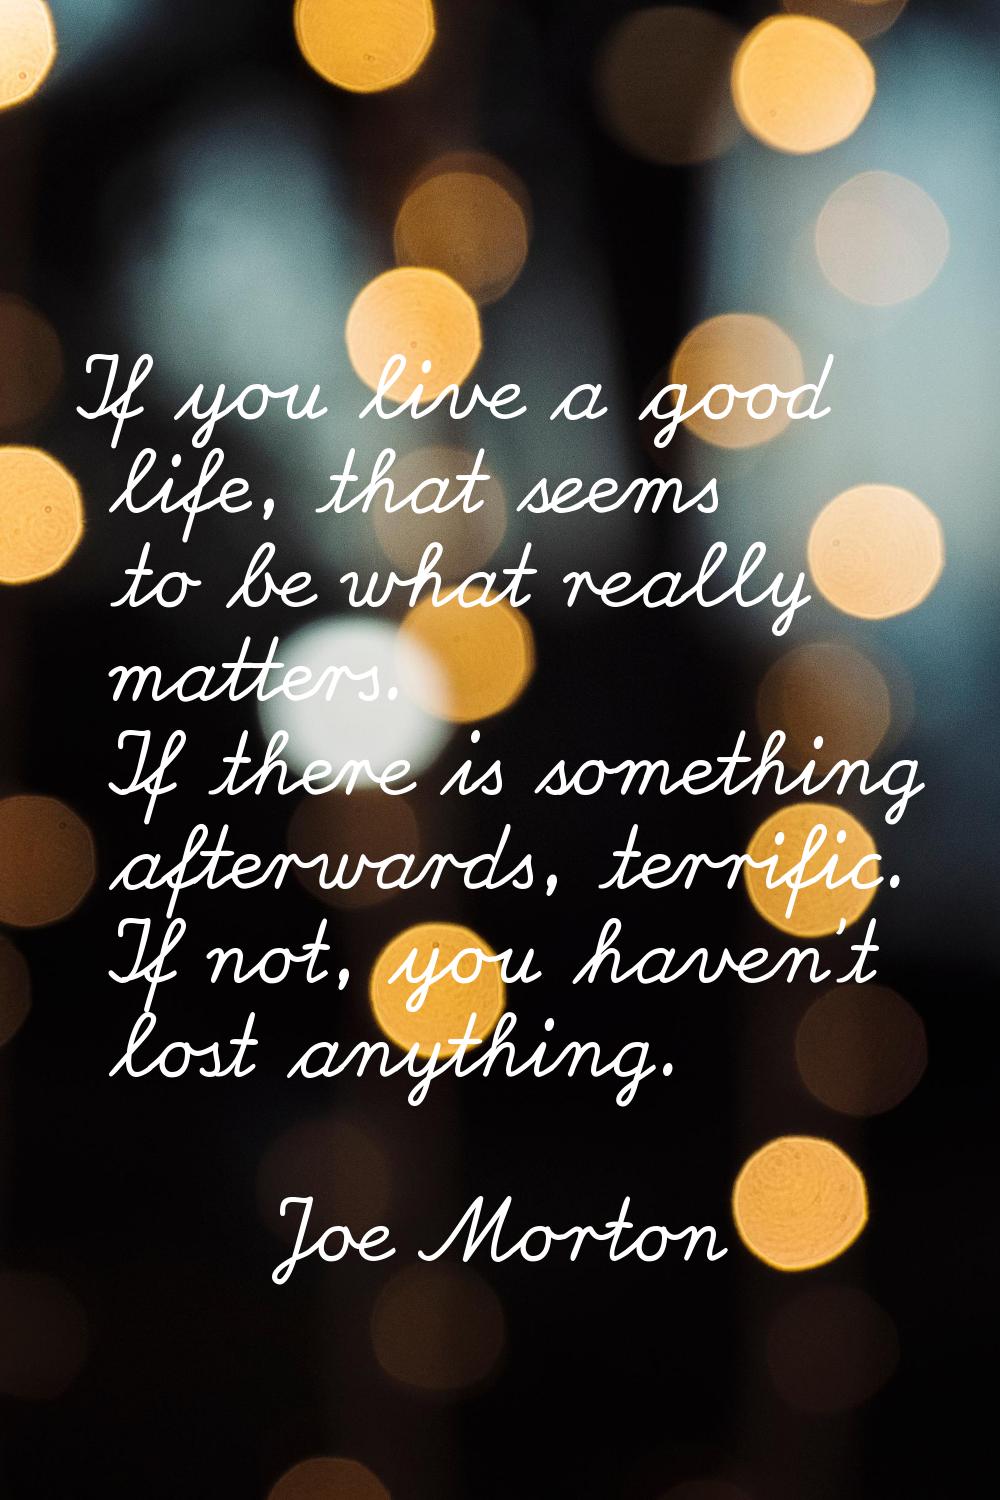 If you live a good life, that seems to be what really matters. If there is something afterwards, te